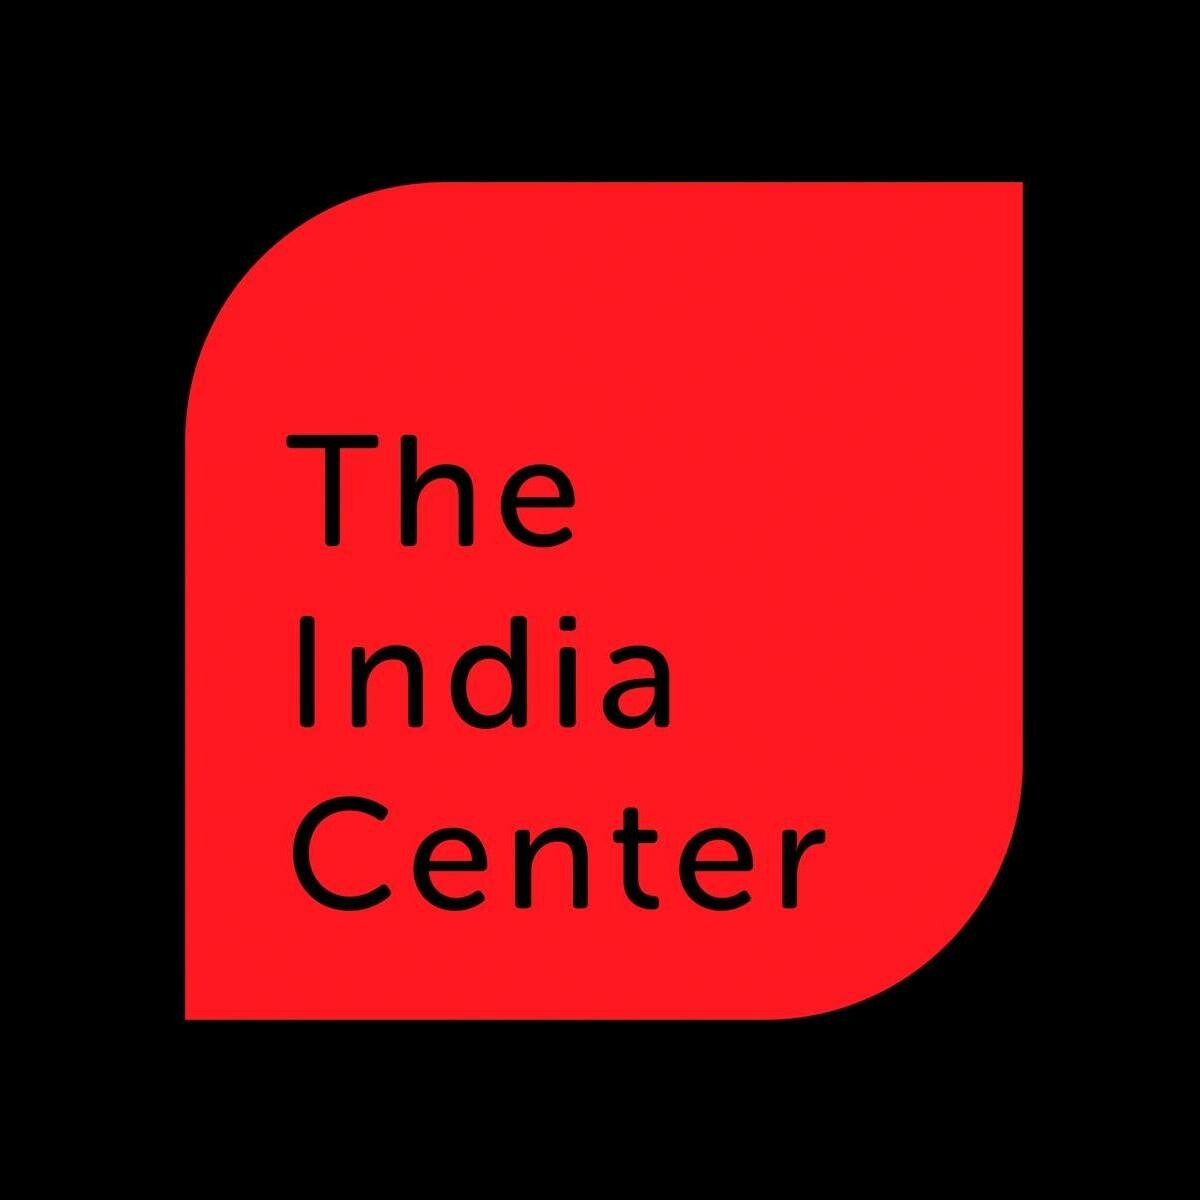 red shape with black text india center